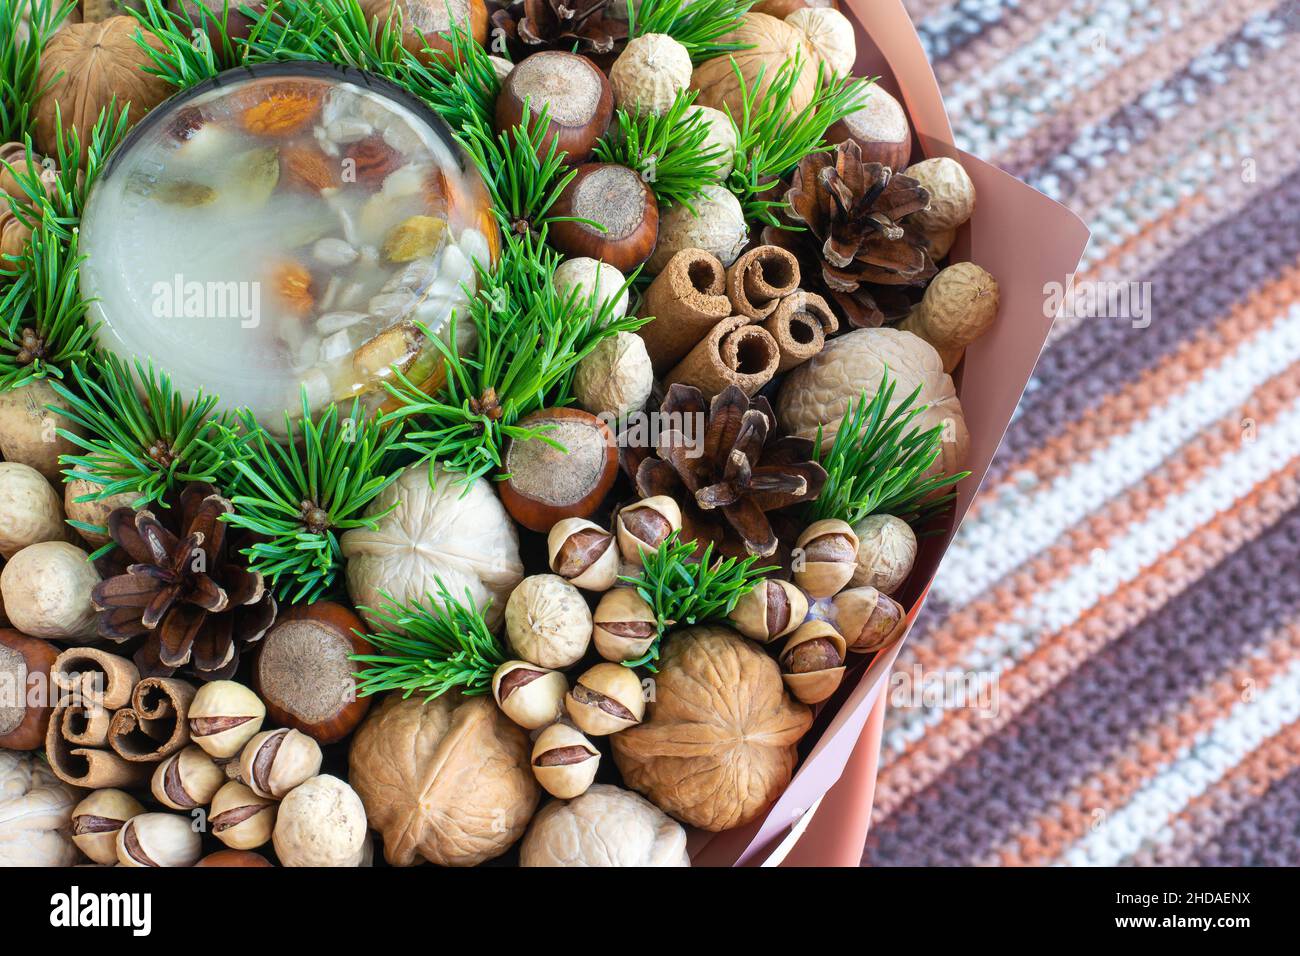 Nut composition with green pine branches on crochet background Stock Photo